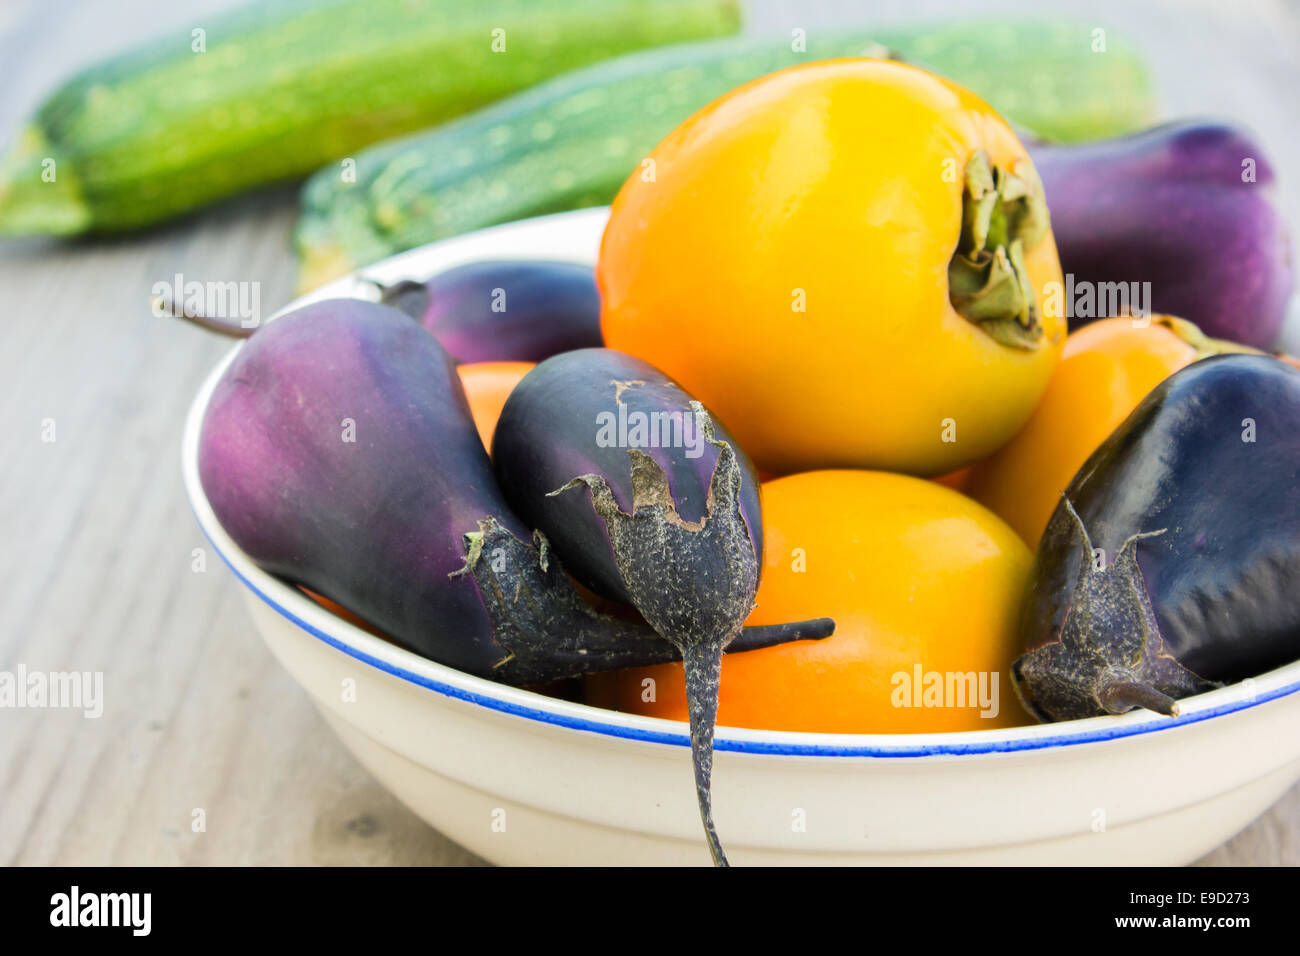 bowl with sharon fruits, courgettes, eggplant Stock Photo